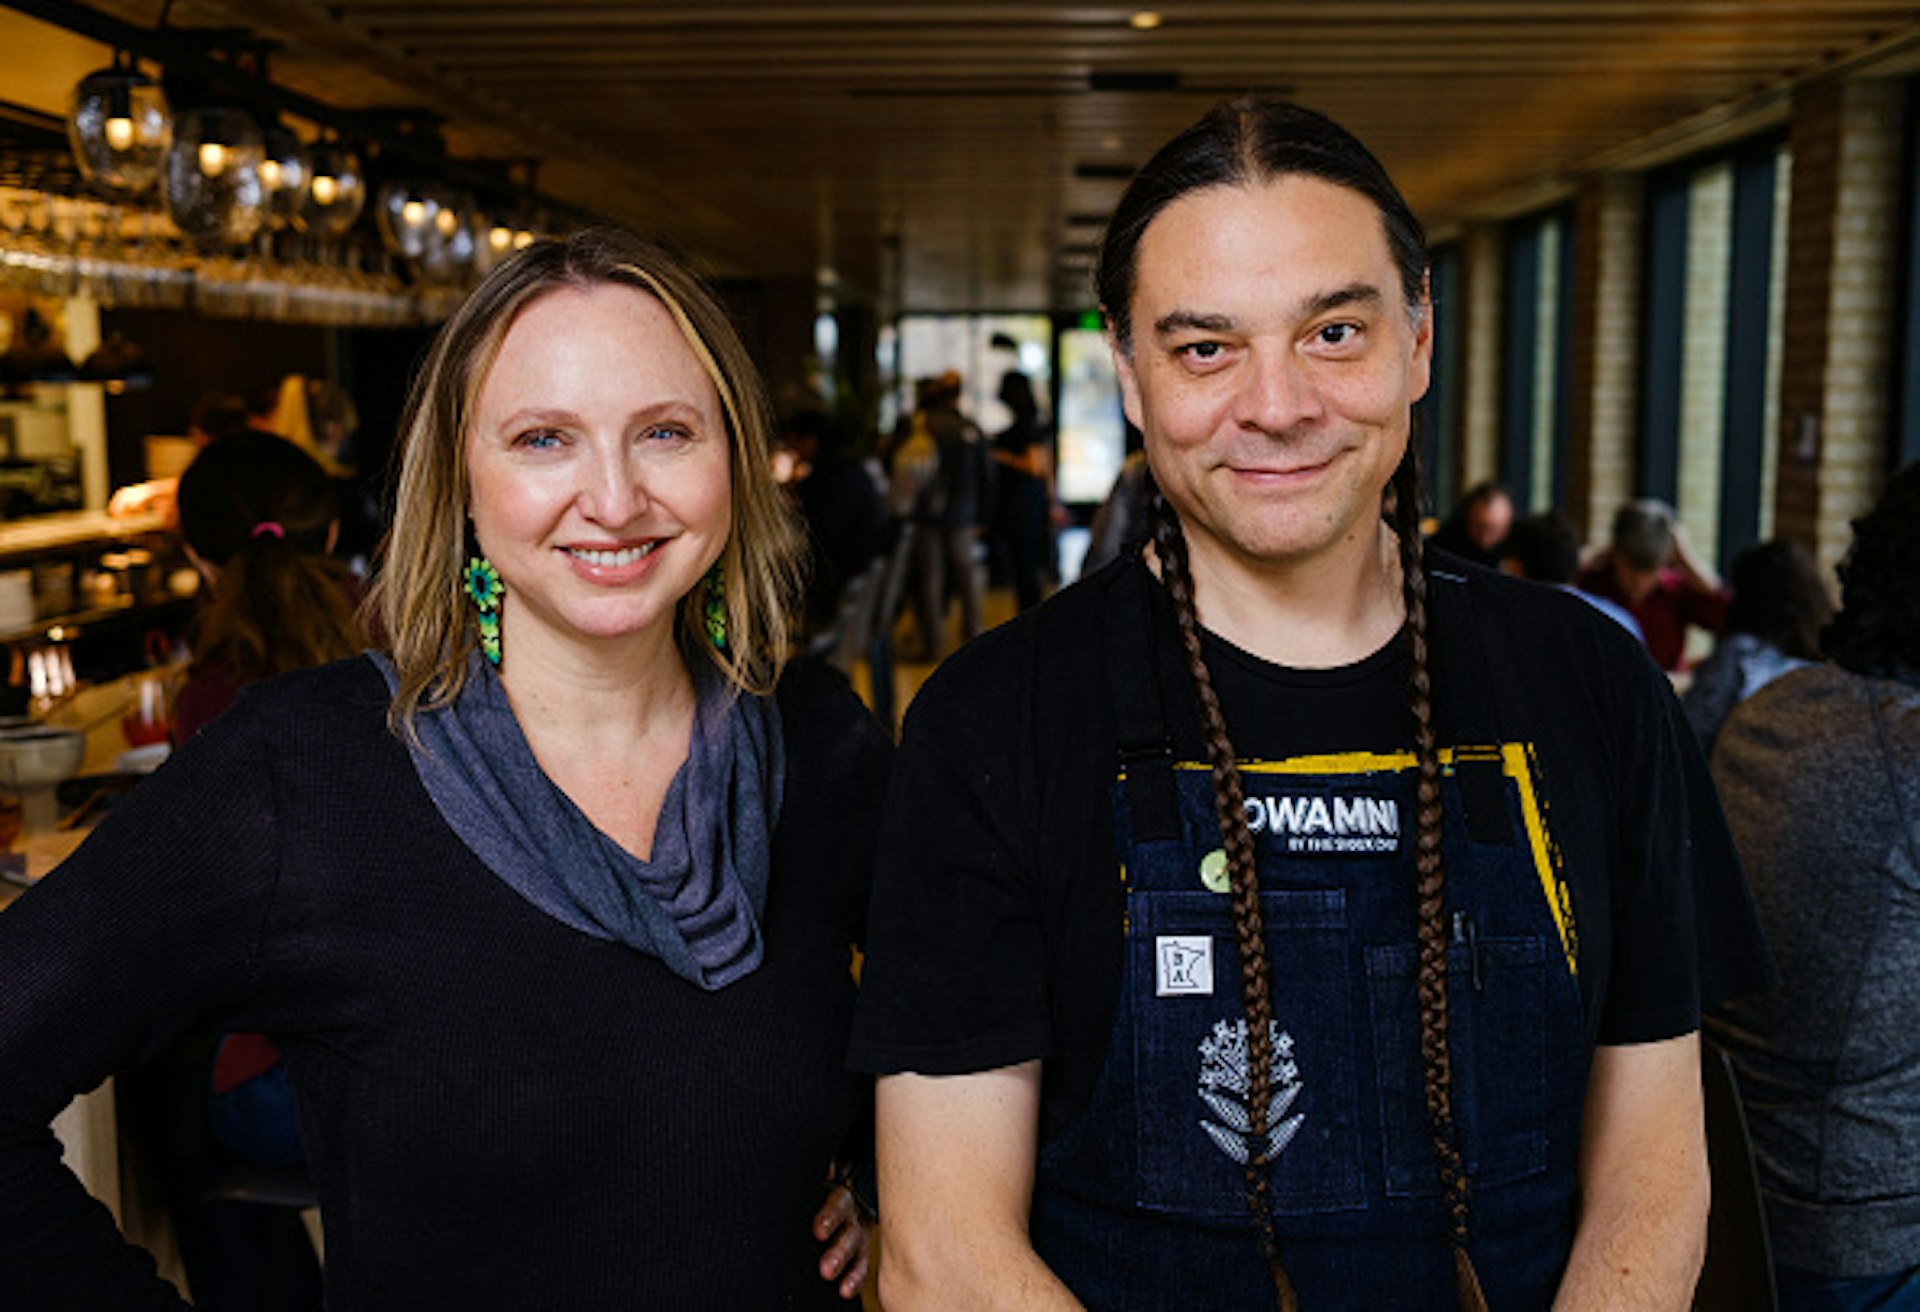 Co-owner Dana Thompson, left, and co-owner and chef Sean Sherman at Owamni by The Sioux Chef restaurant